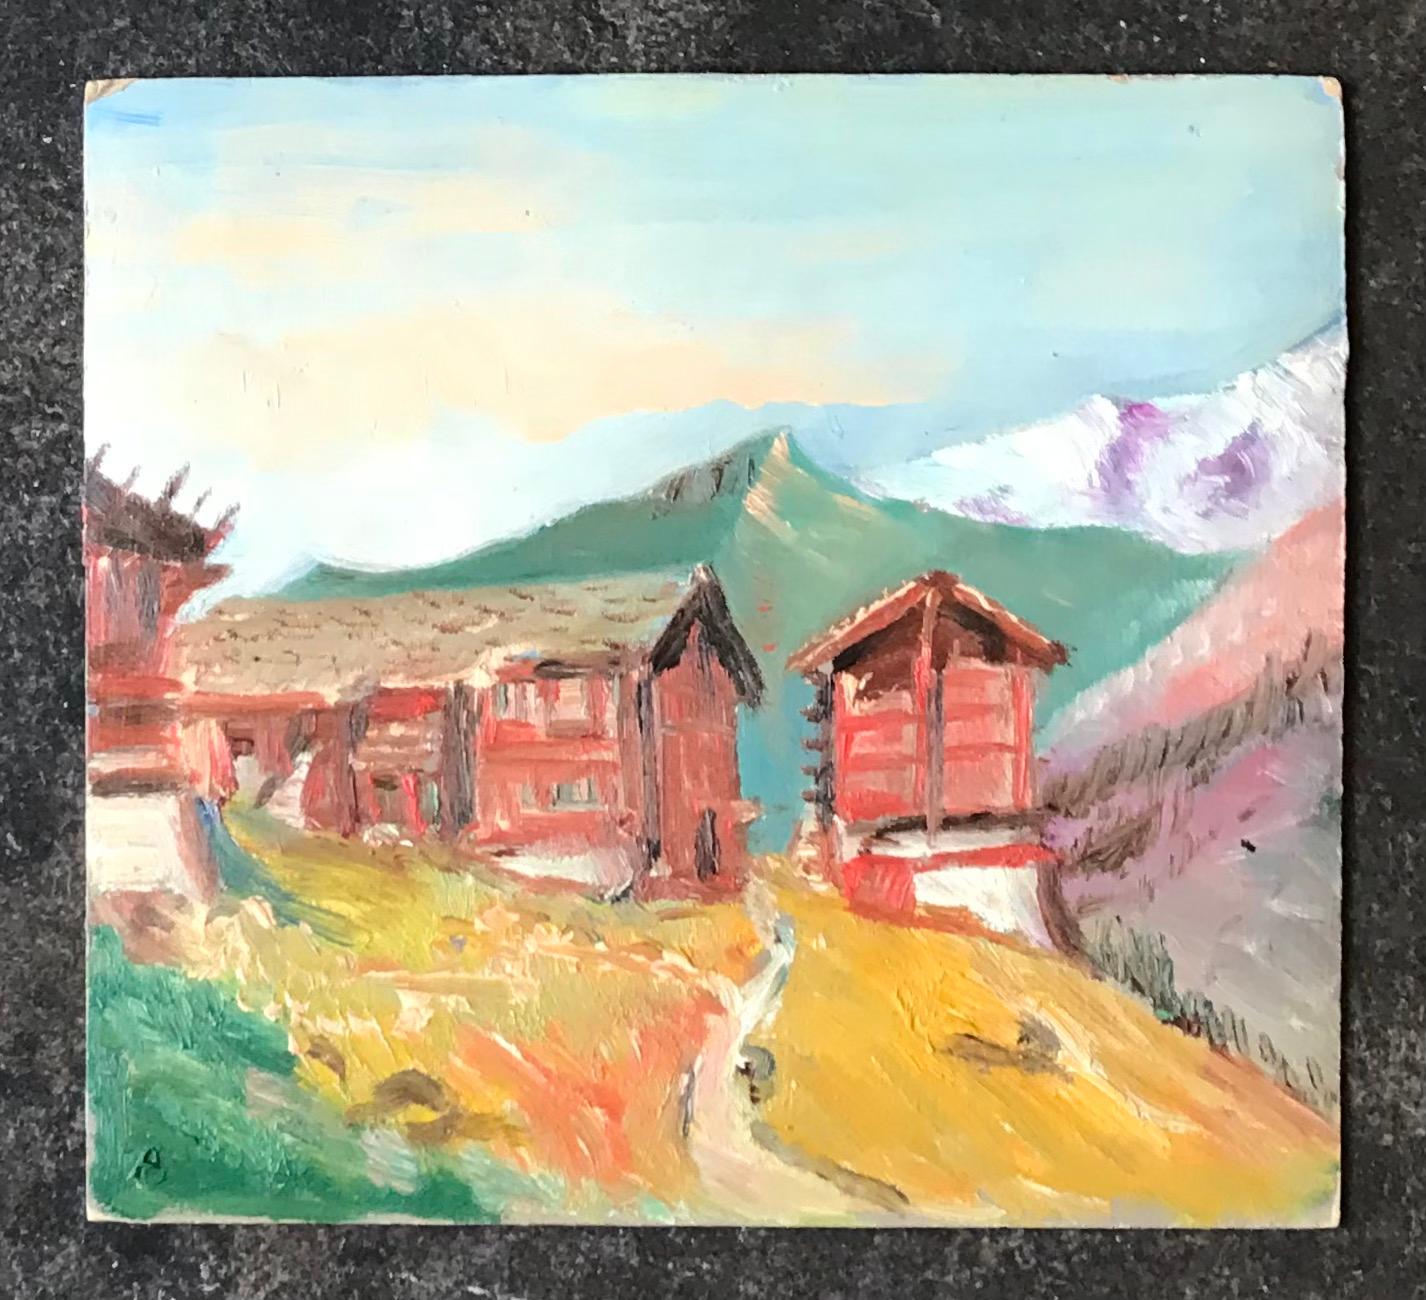 Mountain landscape with chalets - Oil on paper 19x21 cm - Painting by Unknown